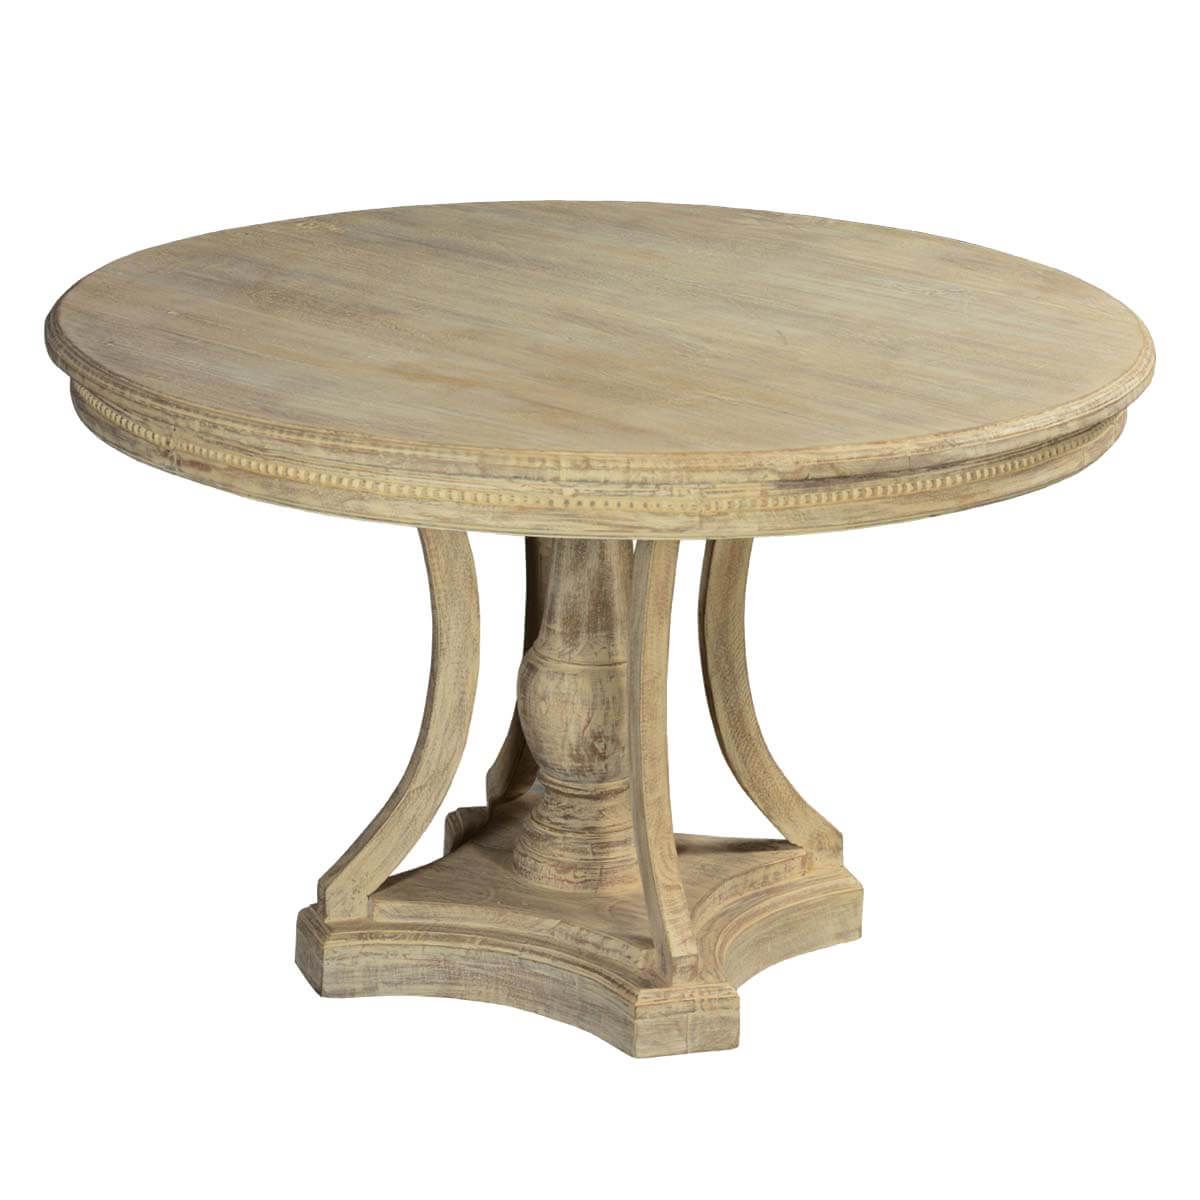 Whitewashed Mango Wood 47" Round Pedestal Dining Table Throughout Preferred Kohut 47'' Pedestal Dining Tables (View 4 of 20)